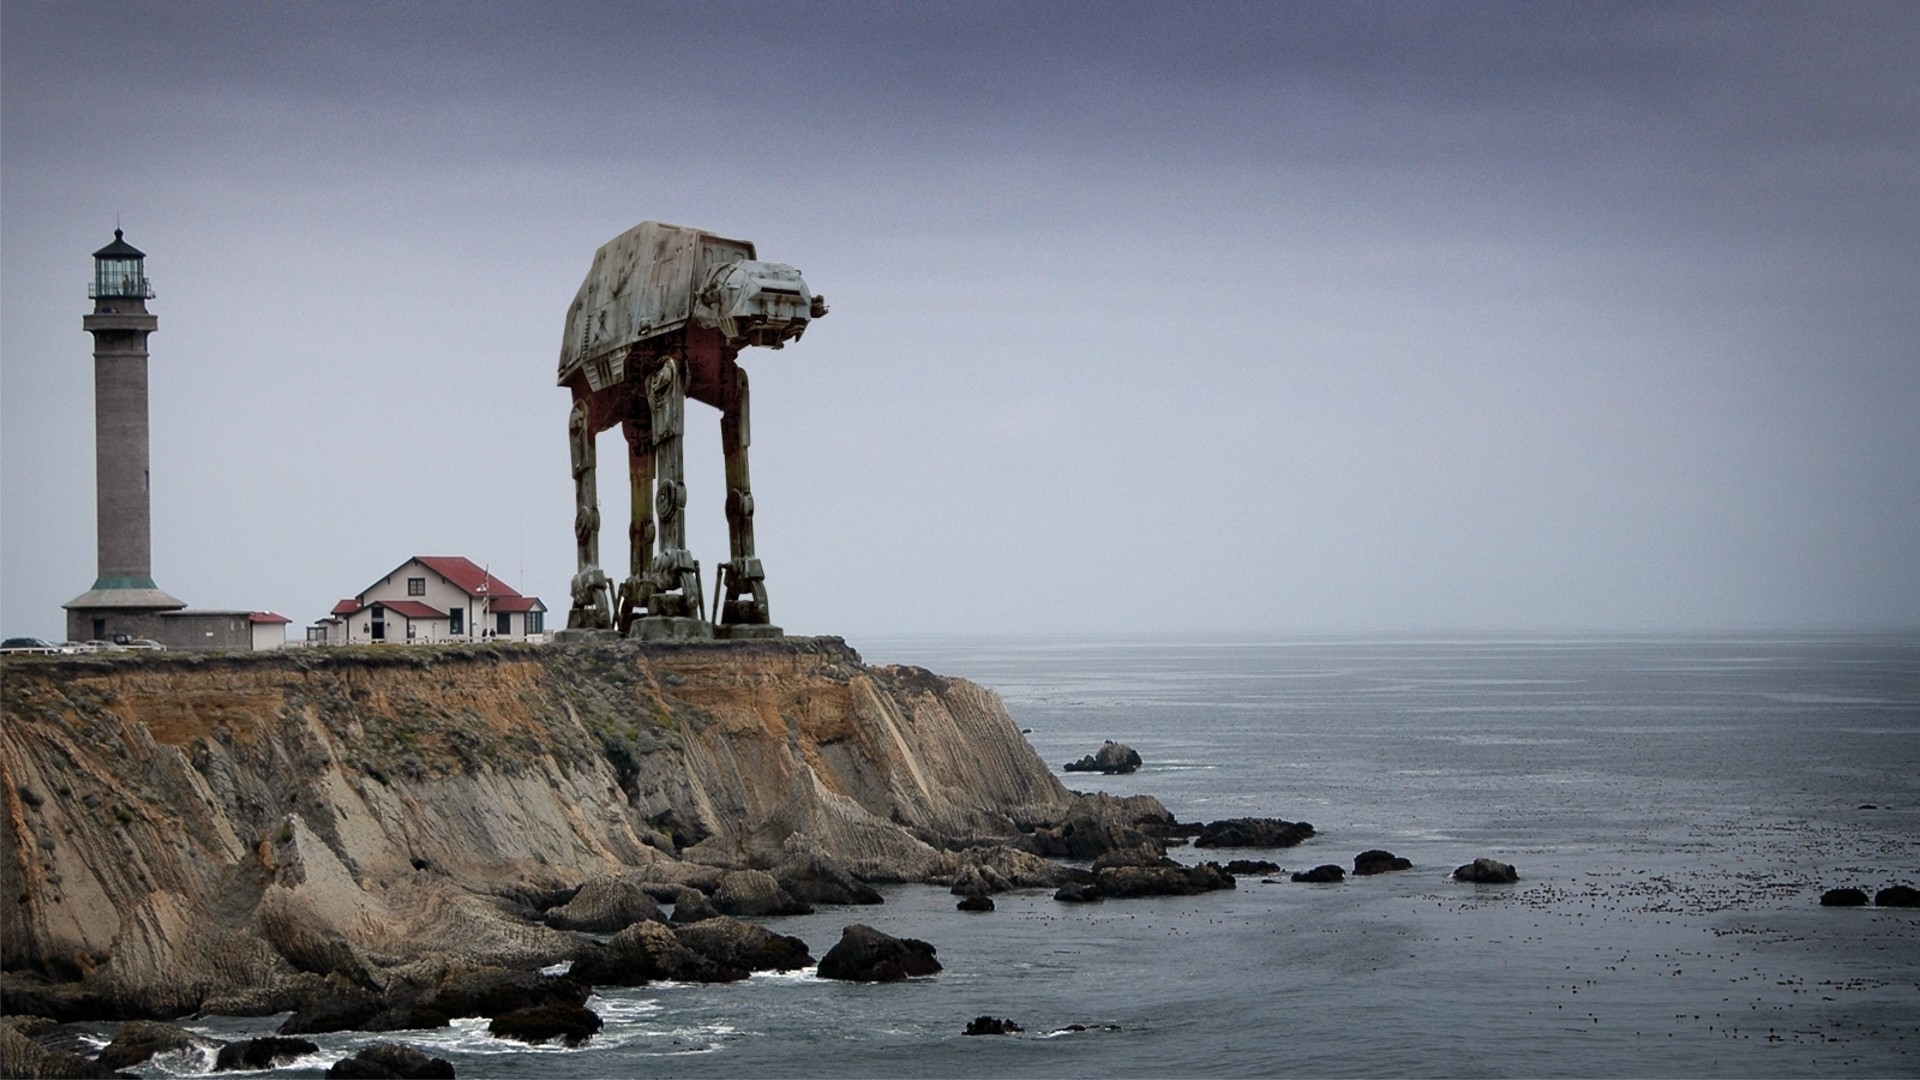 Star Wars AT AT Photo Manipulation Photomontage Sea Lighthouse Imperial Forces 1920x1080